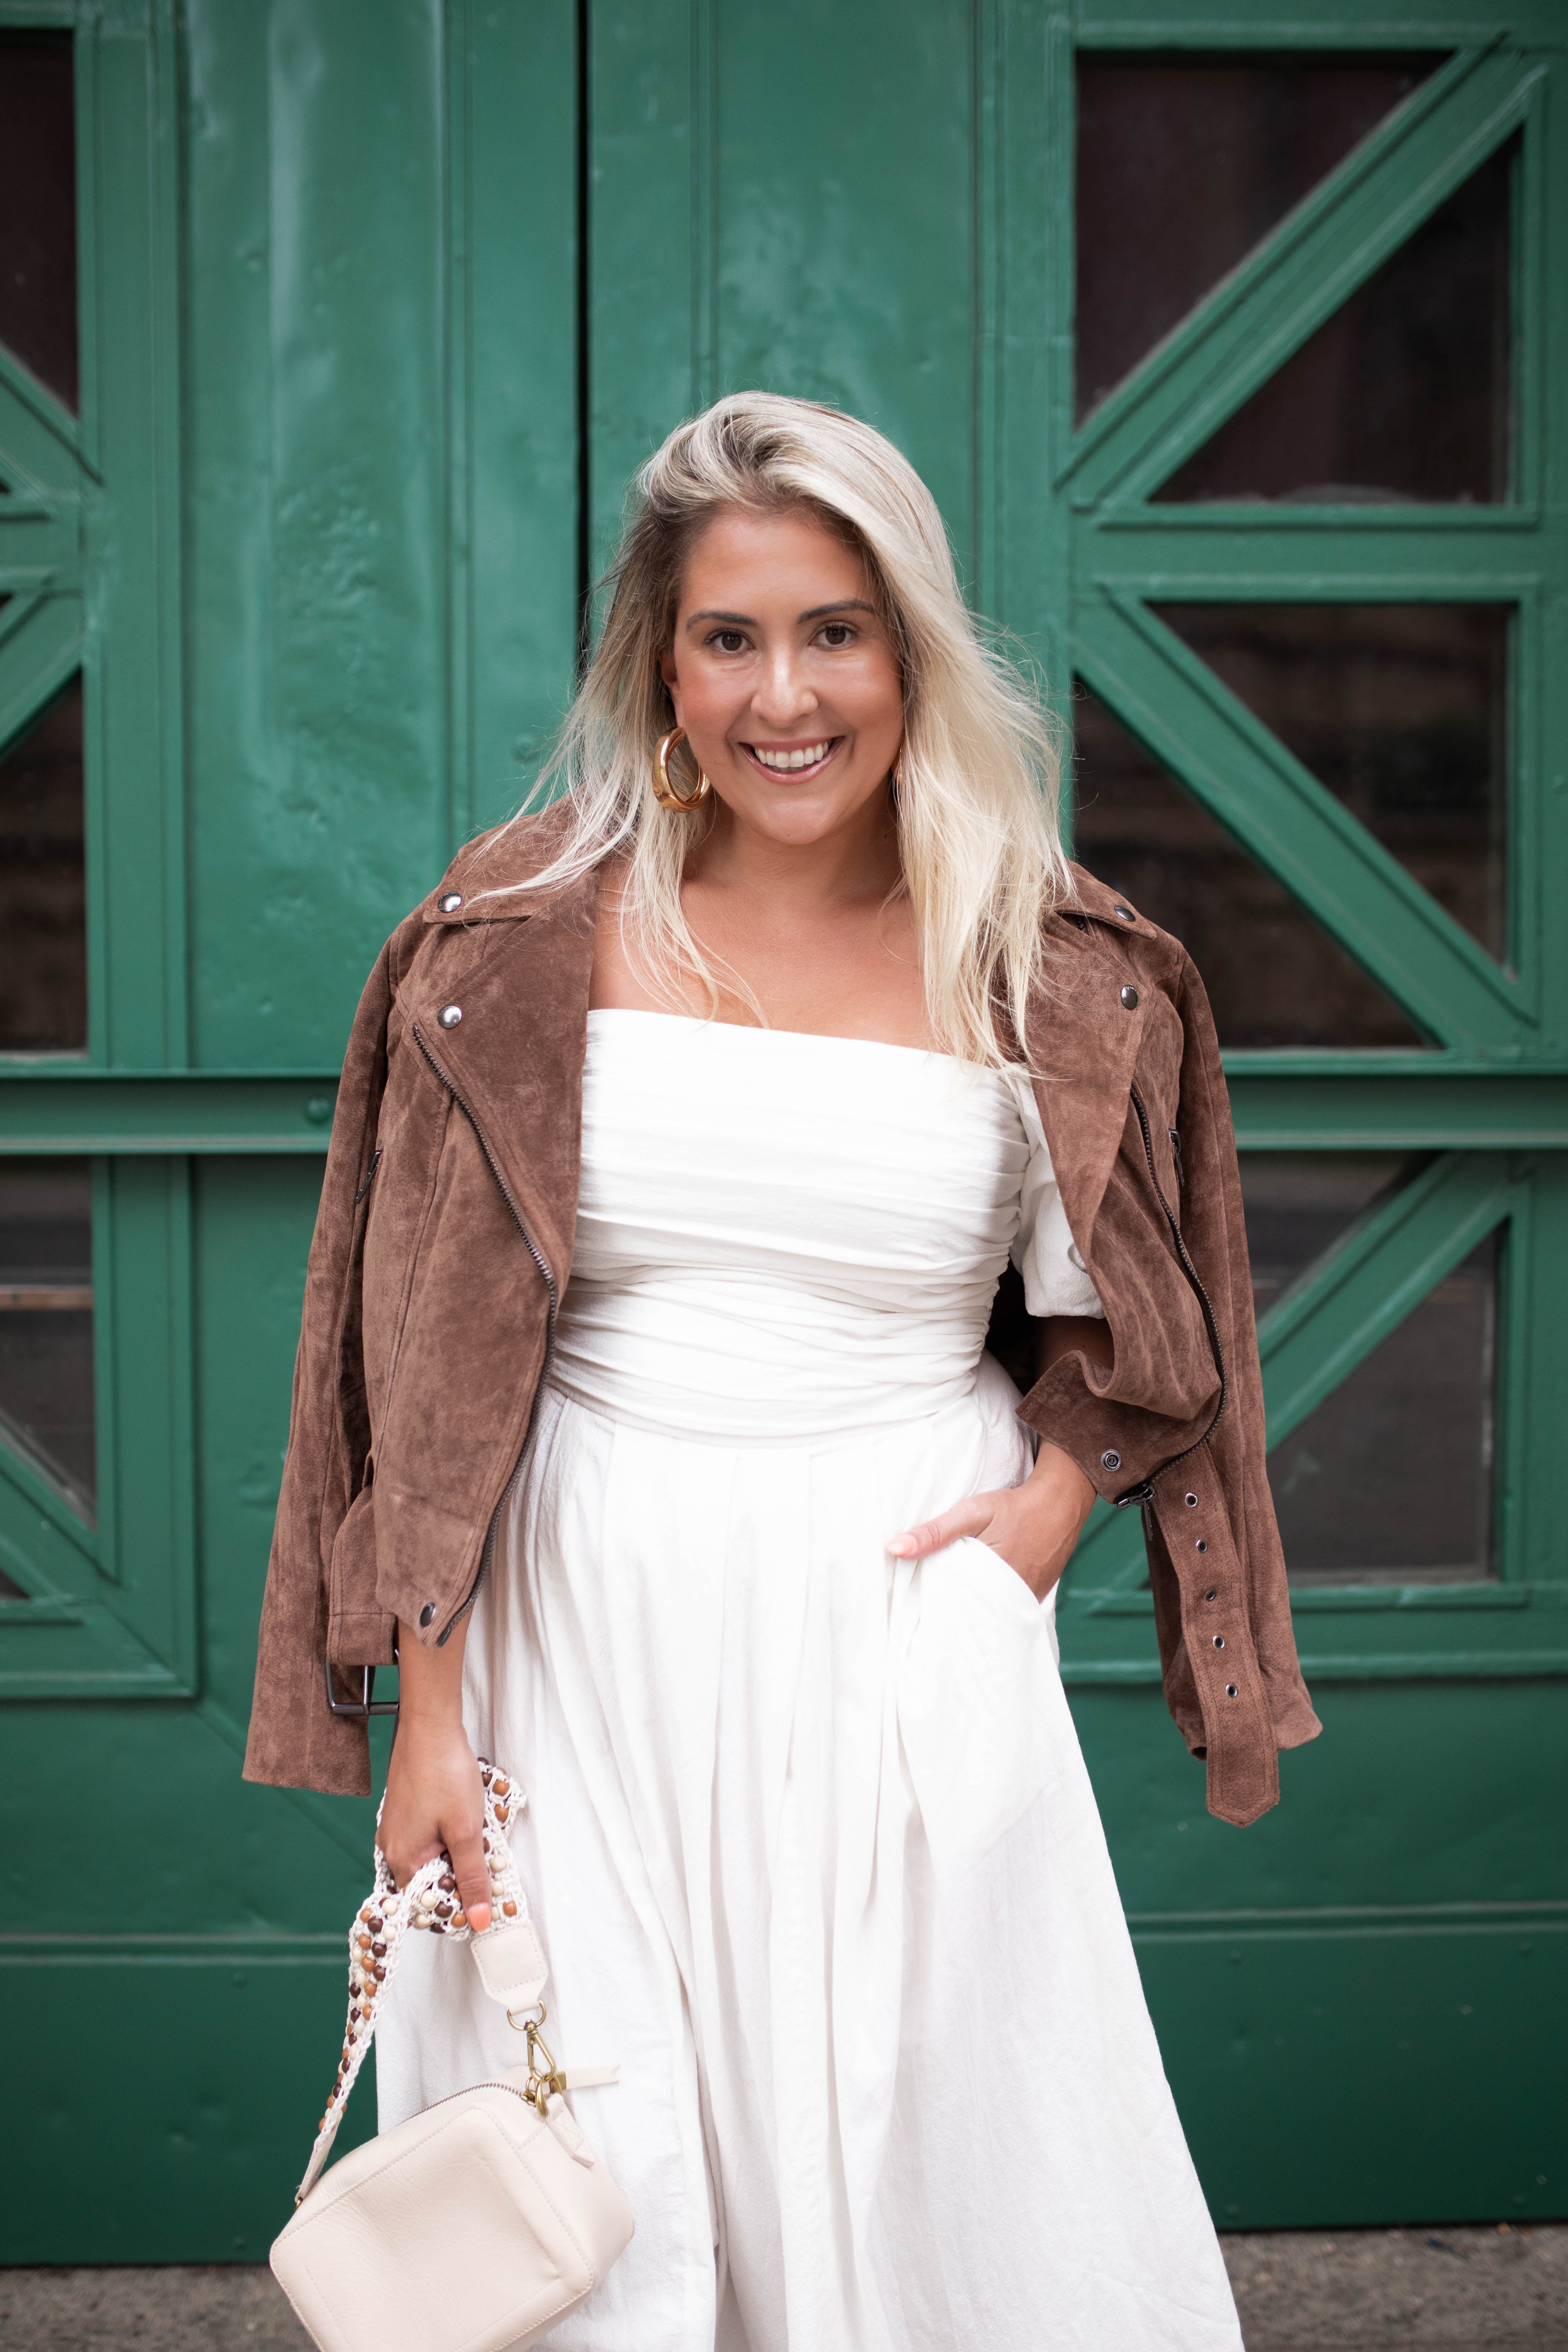 San Francisco blogger Katwalksf styles the Free People Ain't She a Beaut Puff Sleeve Ruched Dress with a brown suede jacket.